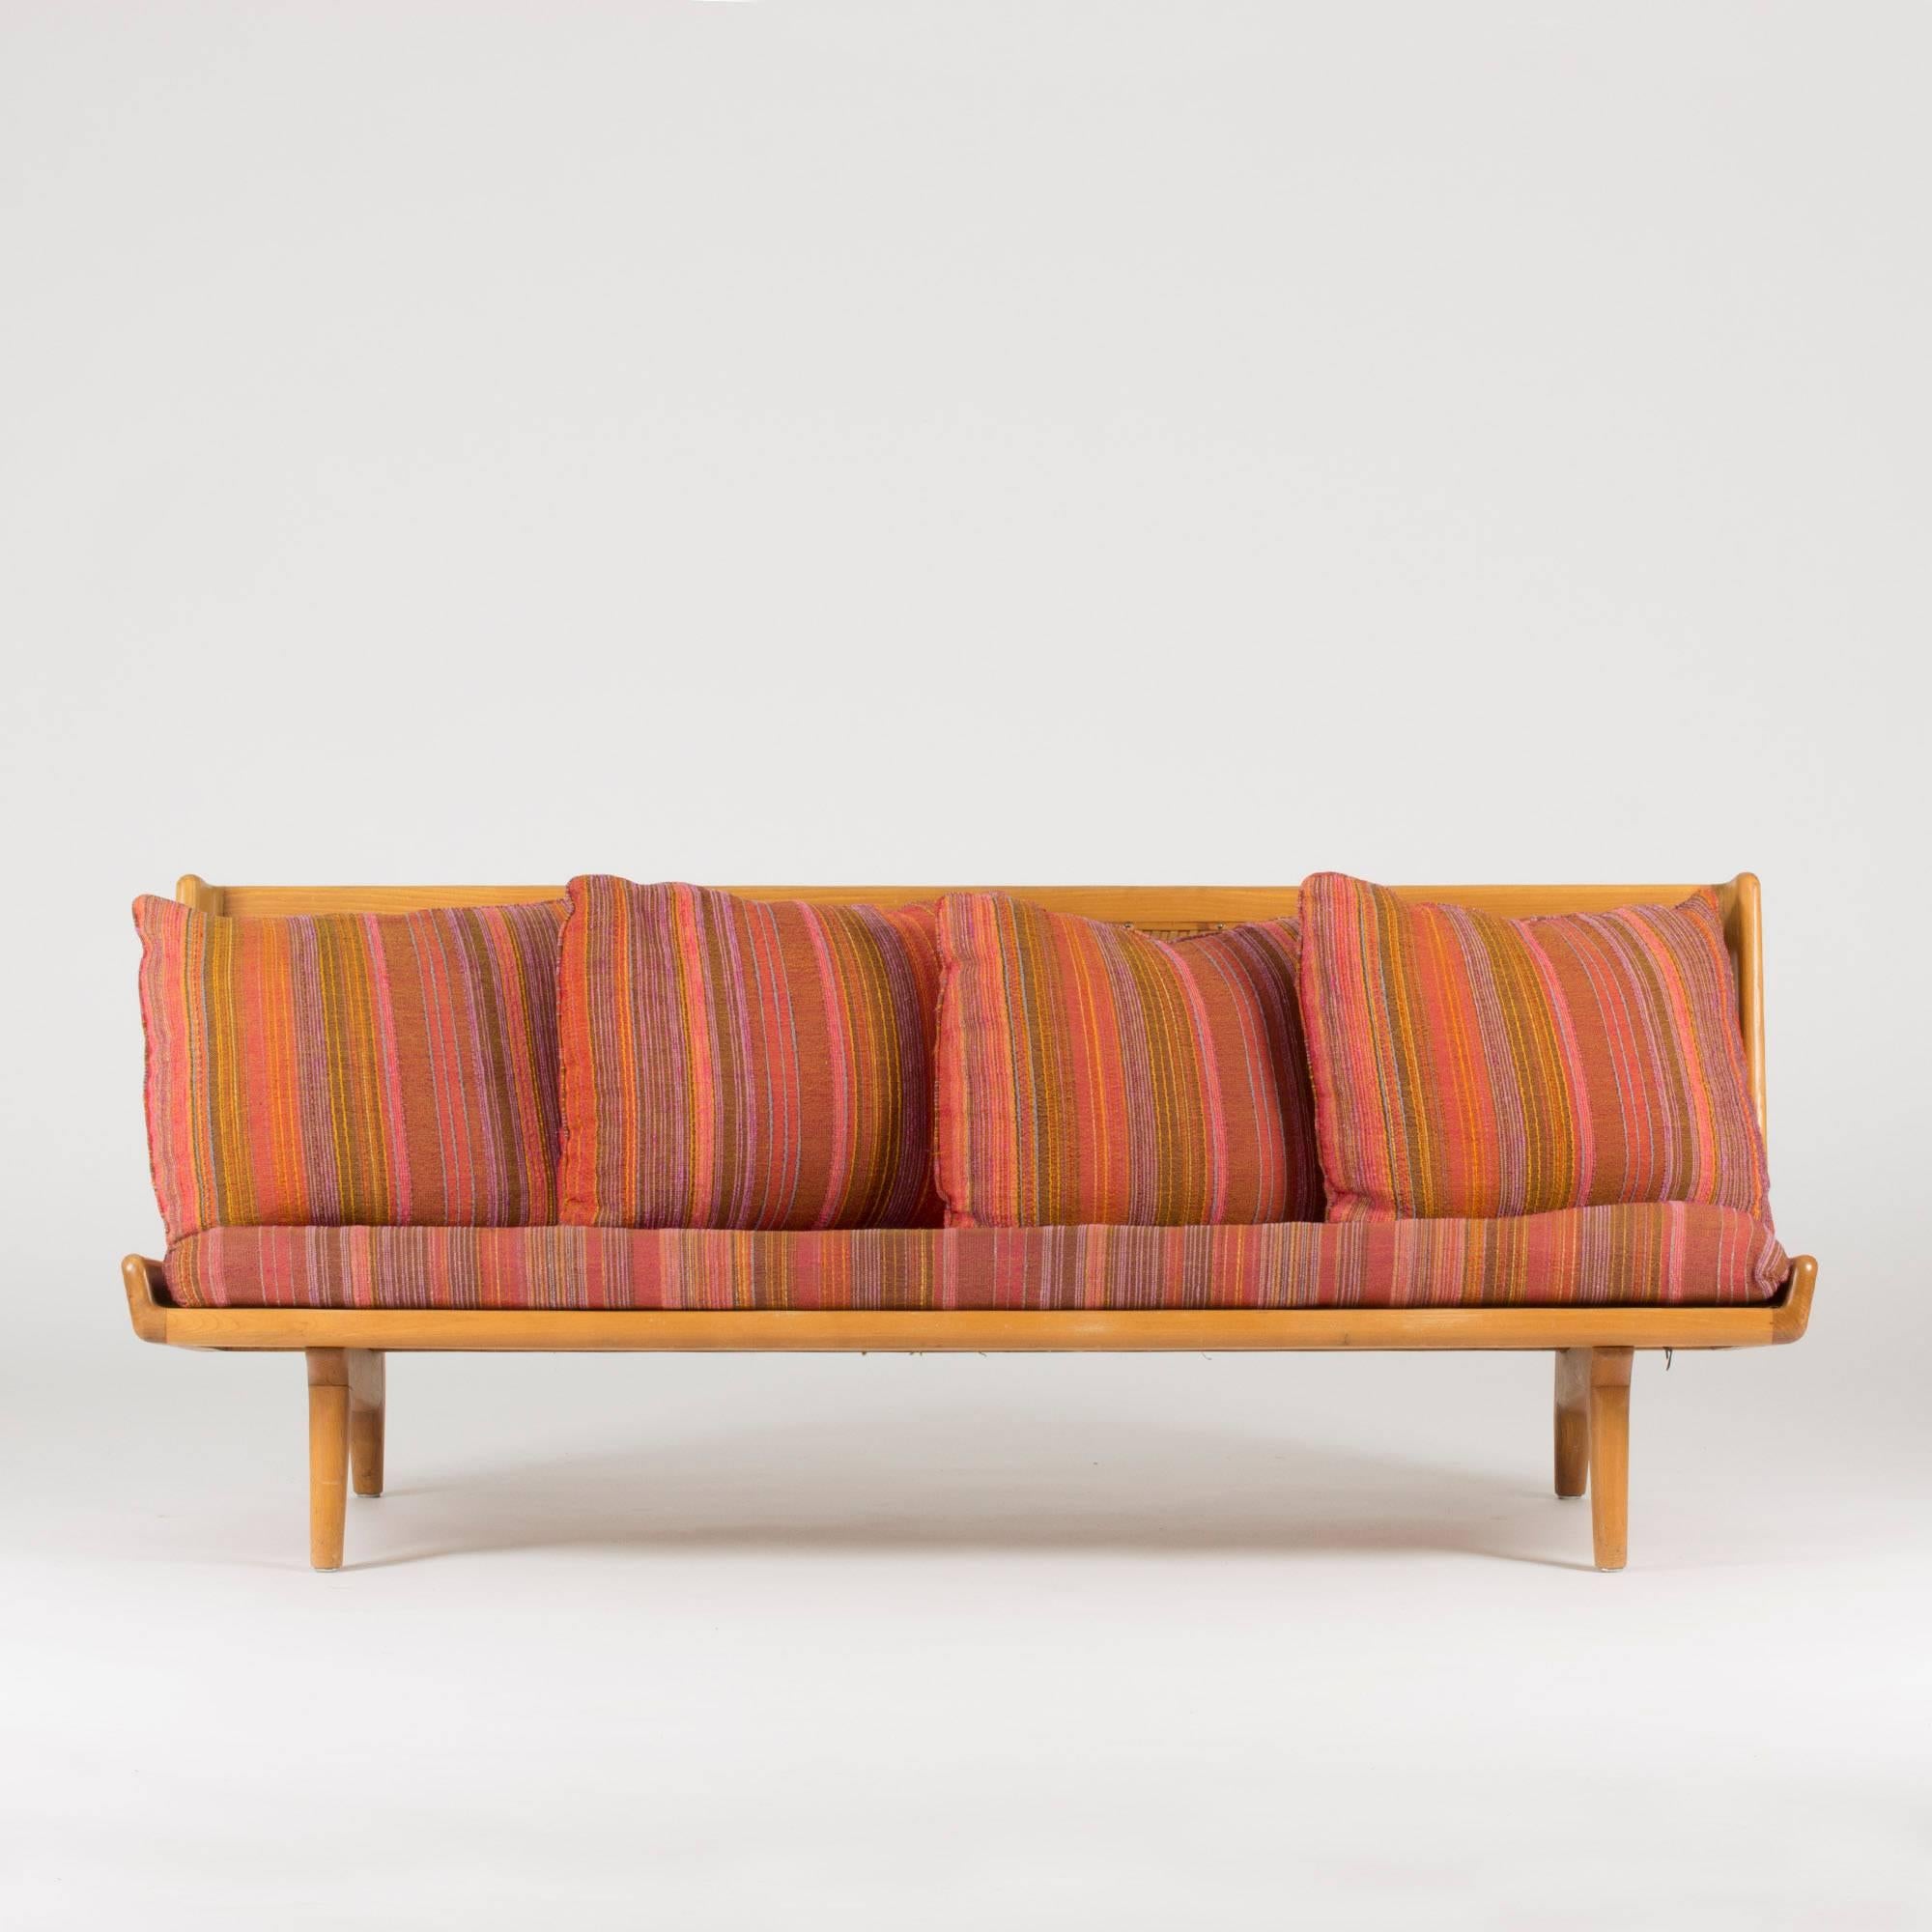 Sofa by Gustaf Hiort af Ornäs, made from beech with sculptural details. The amazing leather webbing backrest makes this sofa a real room jewel. Pillows and seat with beautiful, original wool fabric. Minor repairs to the leather webbing.